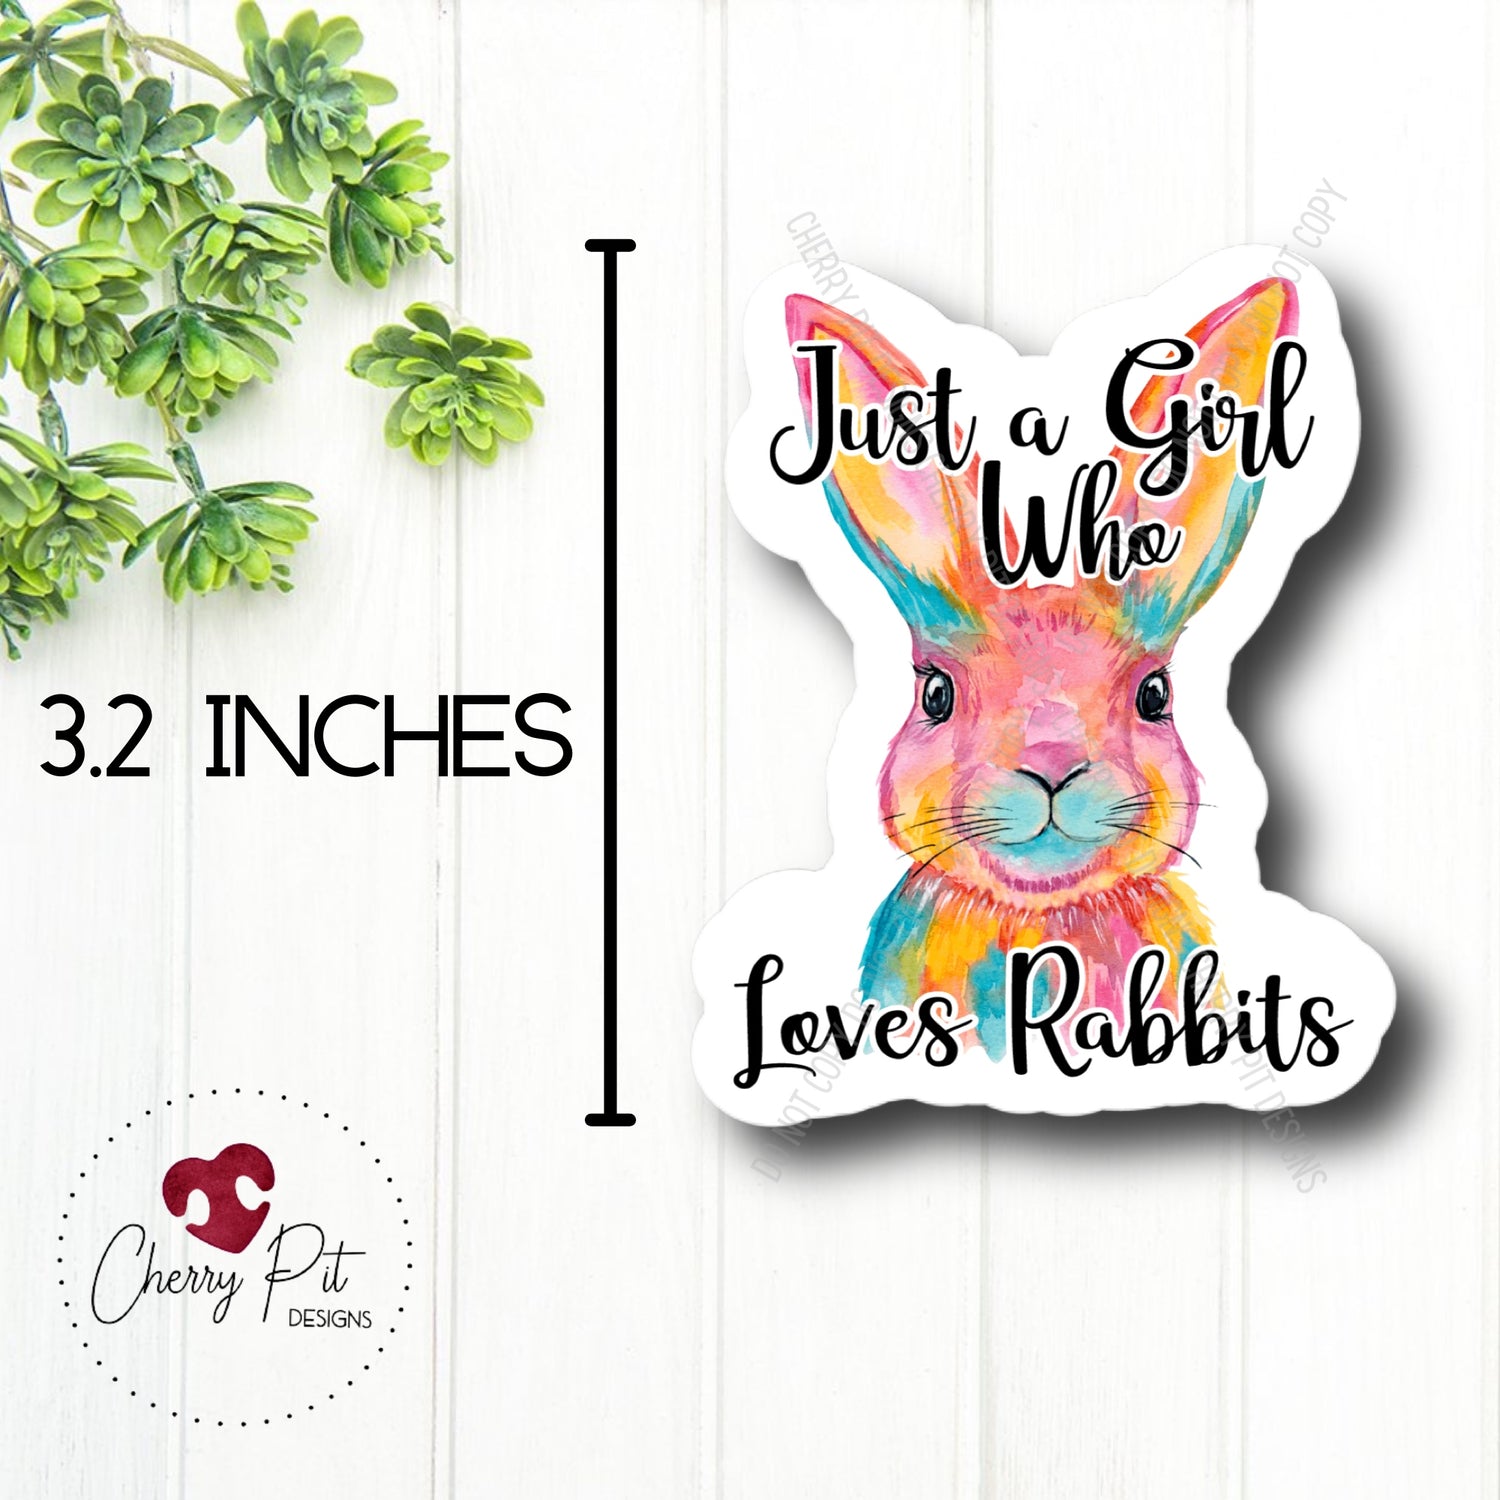 Just a Girl Who Loves Rabbits Vinyl Sticker Decal - Cherry Pit Designs